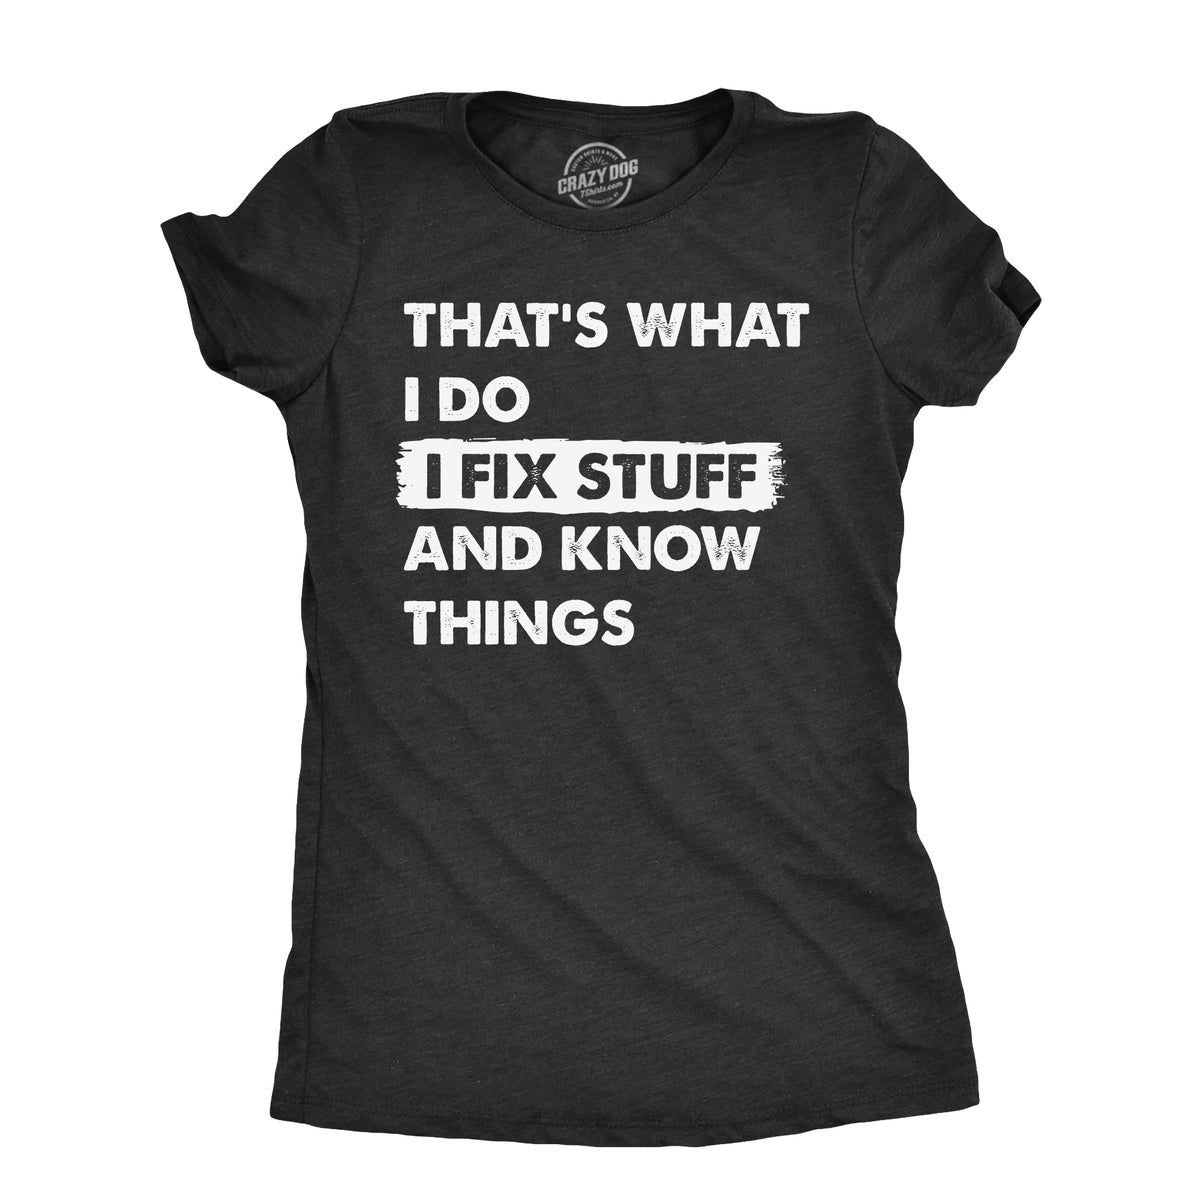 Funny Heather Black - WHATIDO Thats What I Do I Fix Stuff And Know Things Womens T Shirt Nerdy Sarcastic Tee